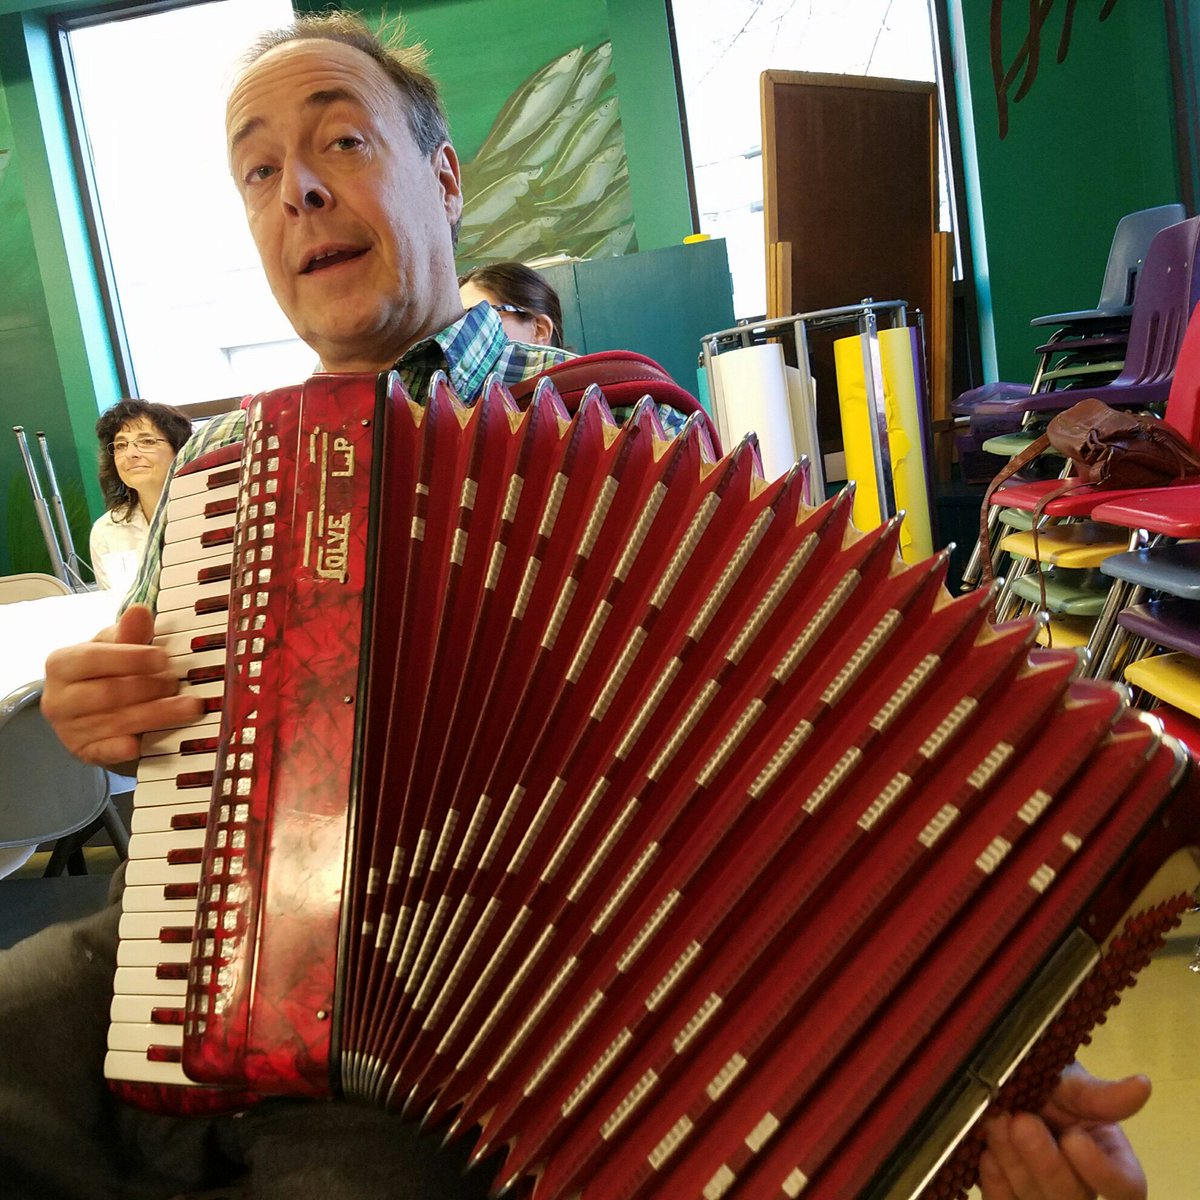 Never a dull moment in the Alzheimer's Café! #accordianmusic #Alzheimers #doverNH